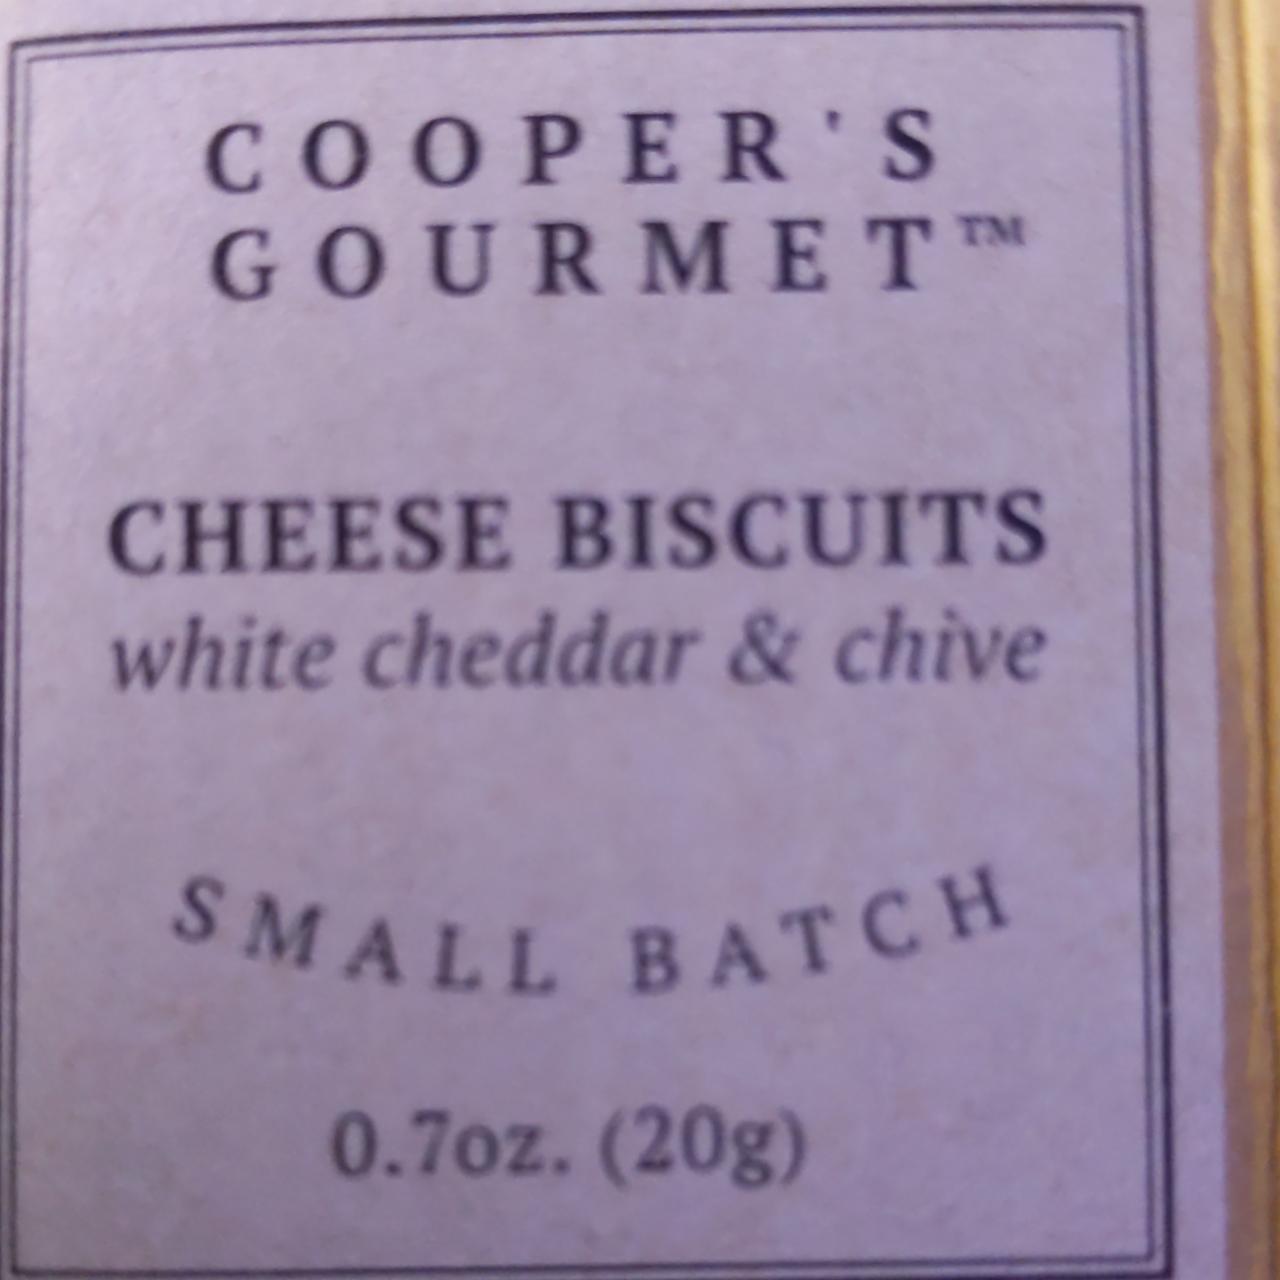 Fotografie - Cheese biscuits white cheddar & chive Cooper's gourmet